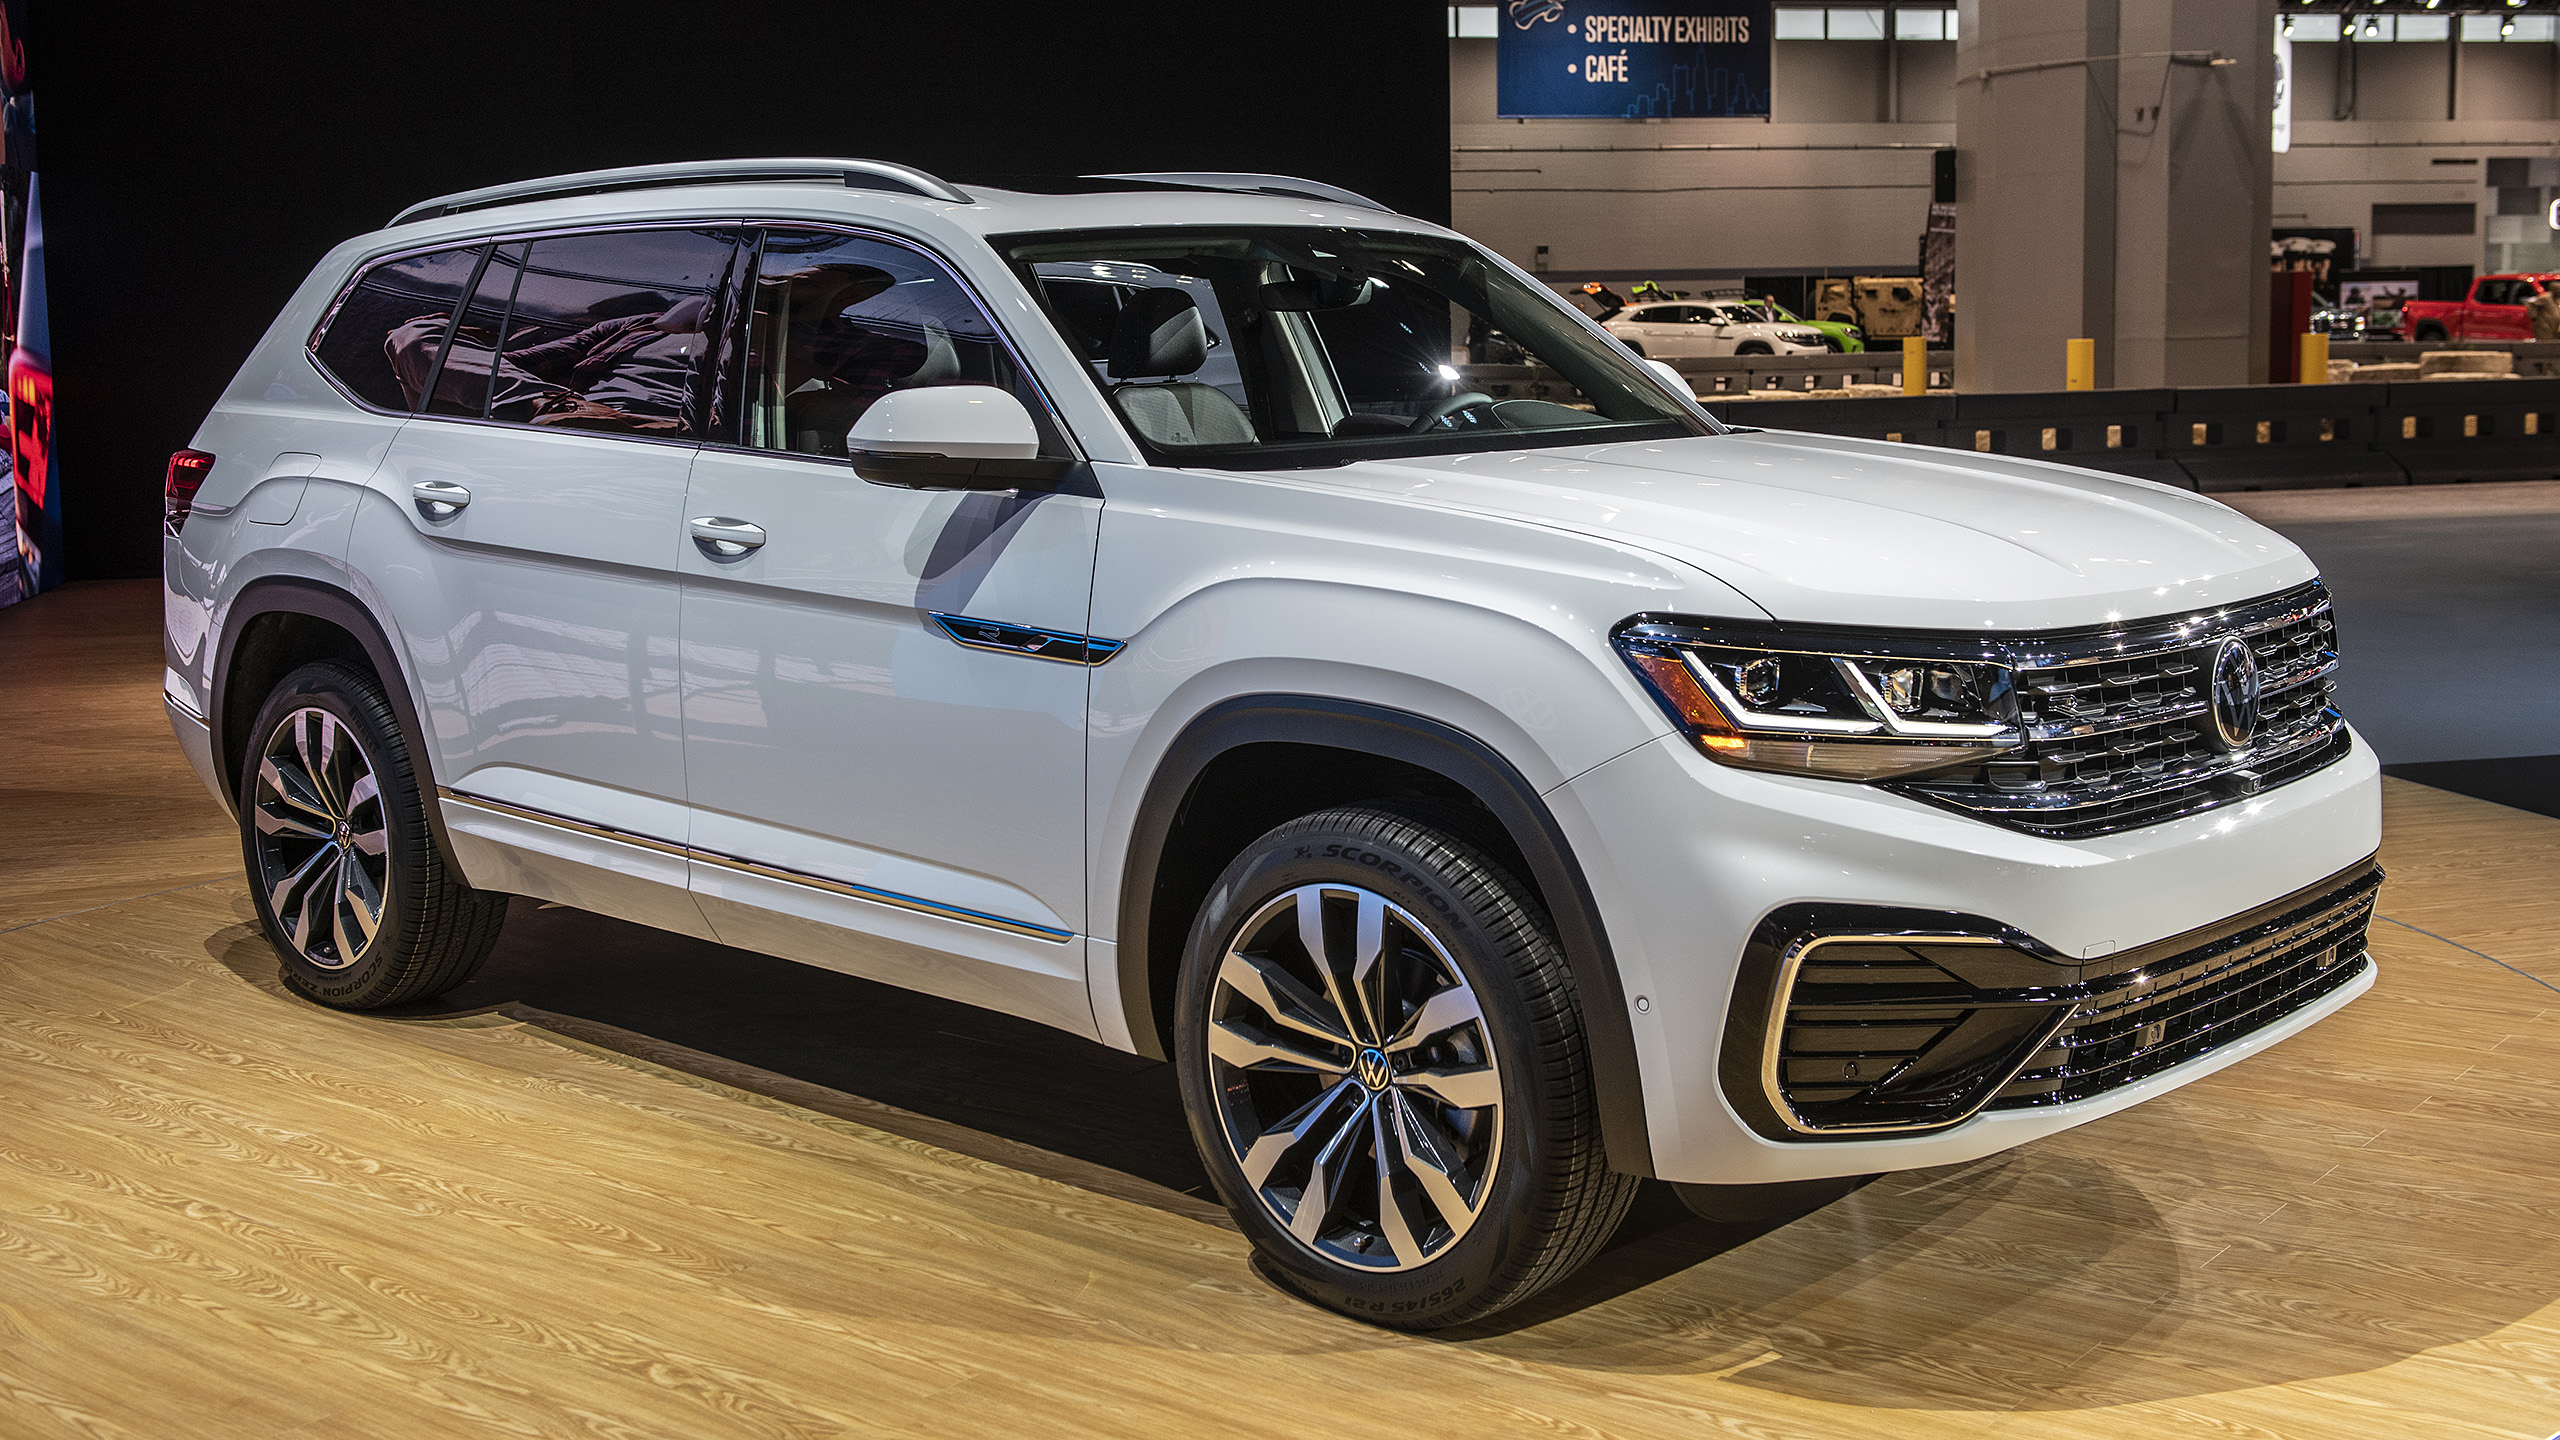 2021 Volkswagen Atlas unveiled at Chicago auto show with new design